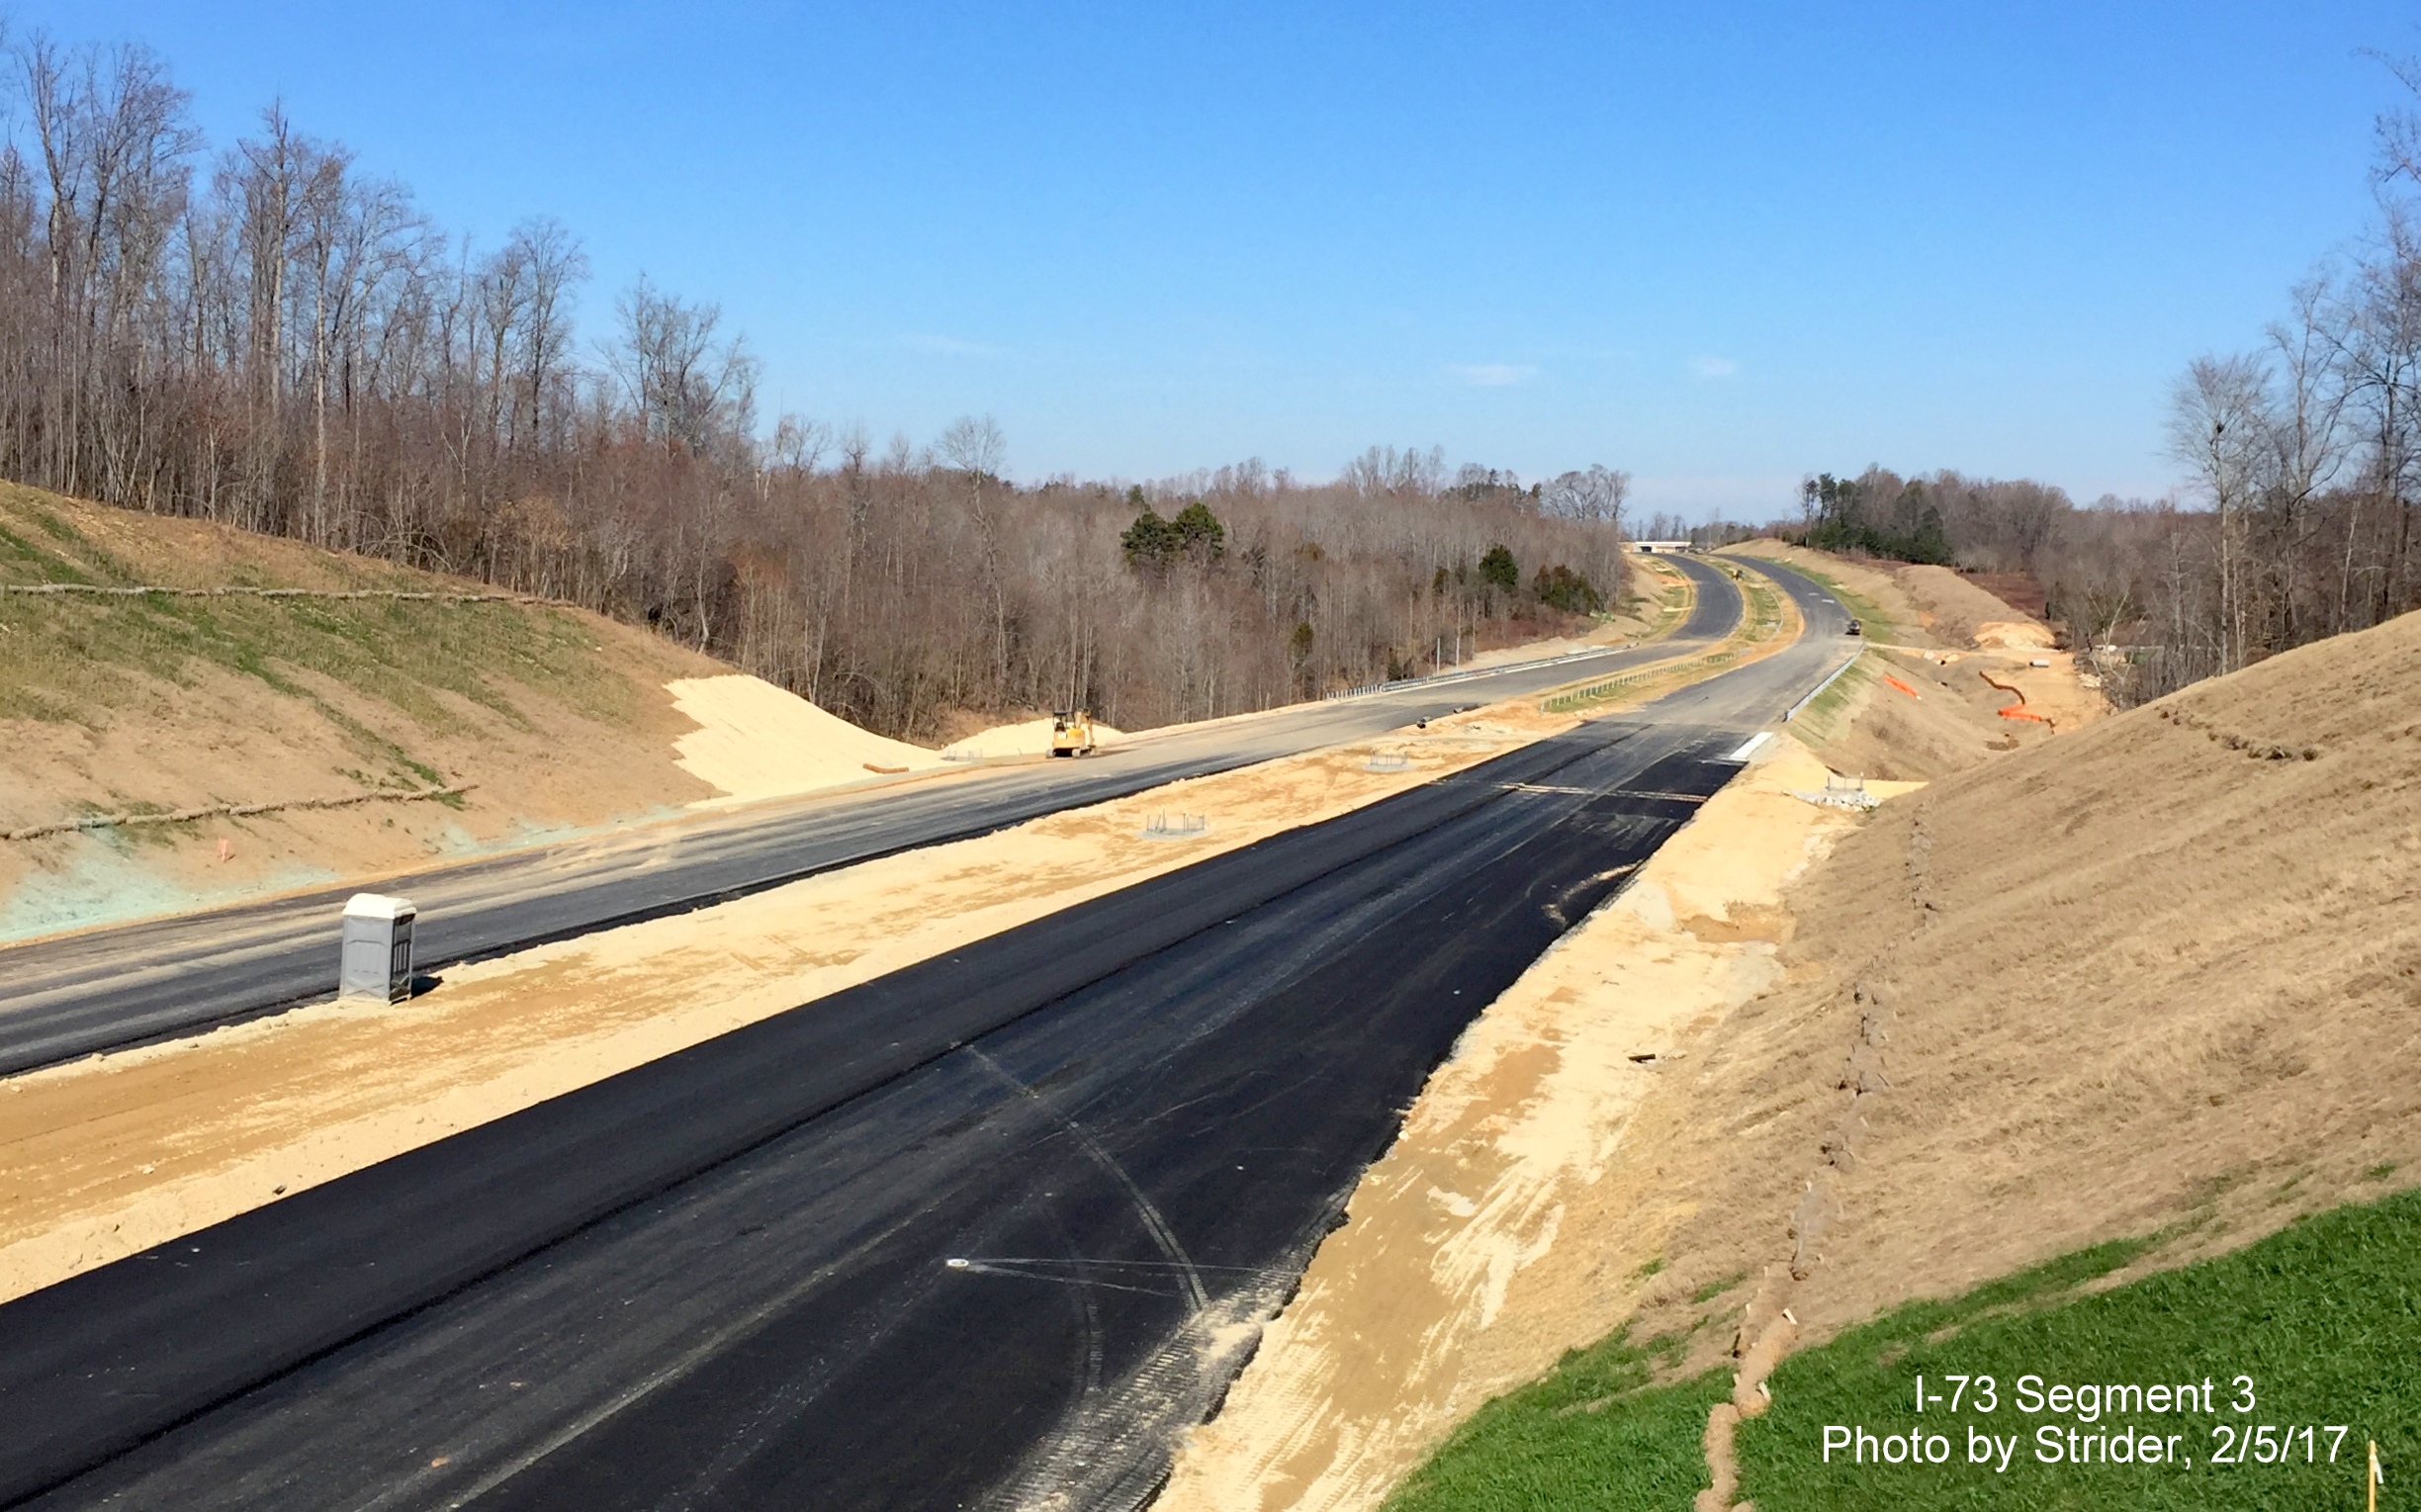 Image of view looking from Brookbank Rd bridge showign progress in paving future I-73 lanes, from Strider